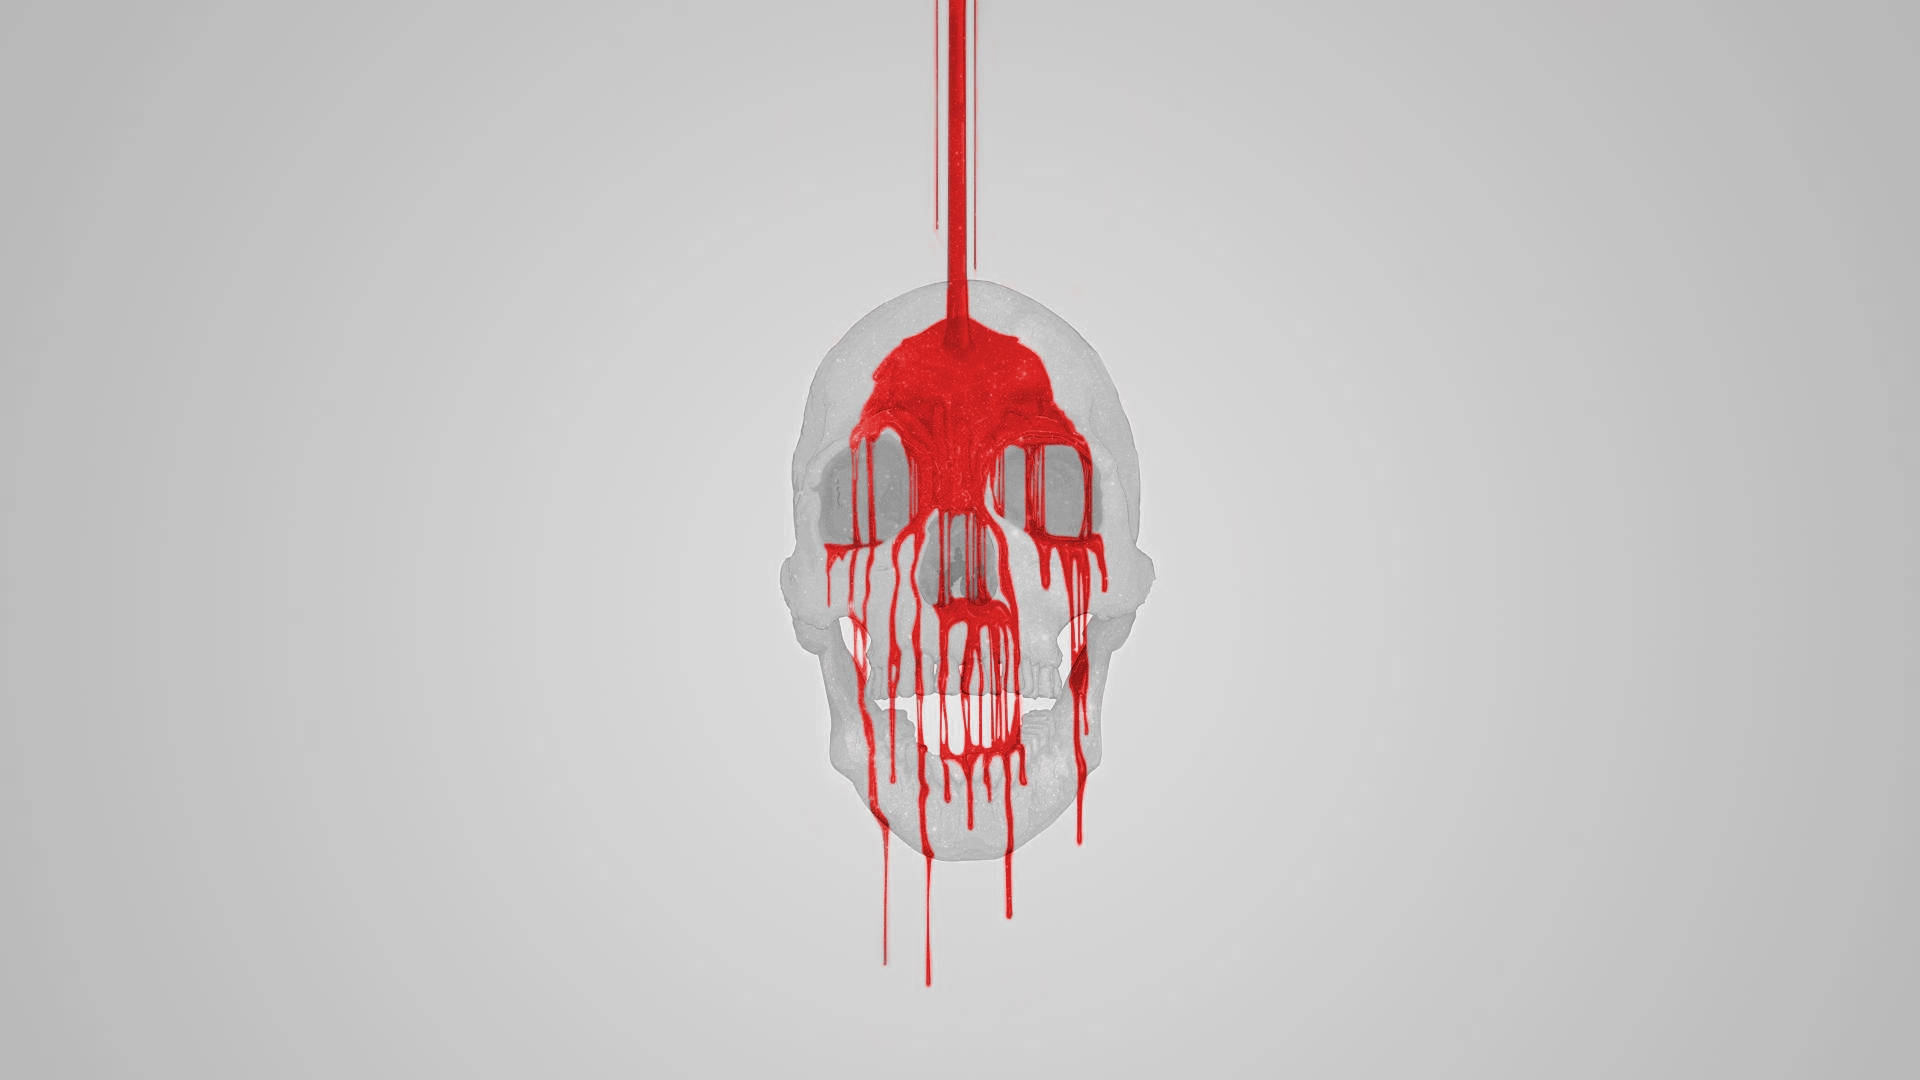 Free Skull Iphone Wallpaper Downloads, [100+] Skull Iphone Wallpapers for  FREE 